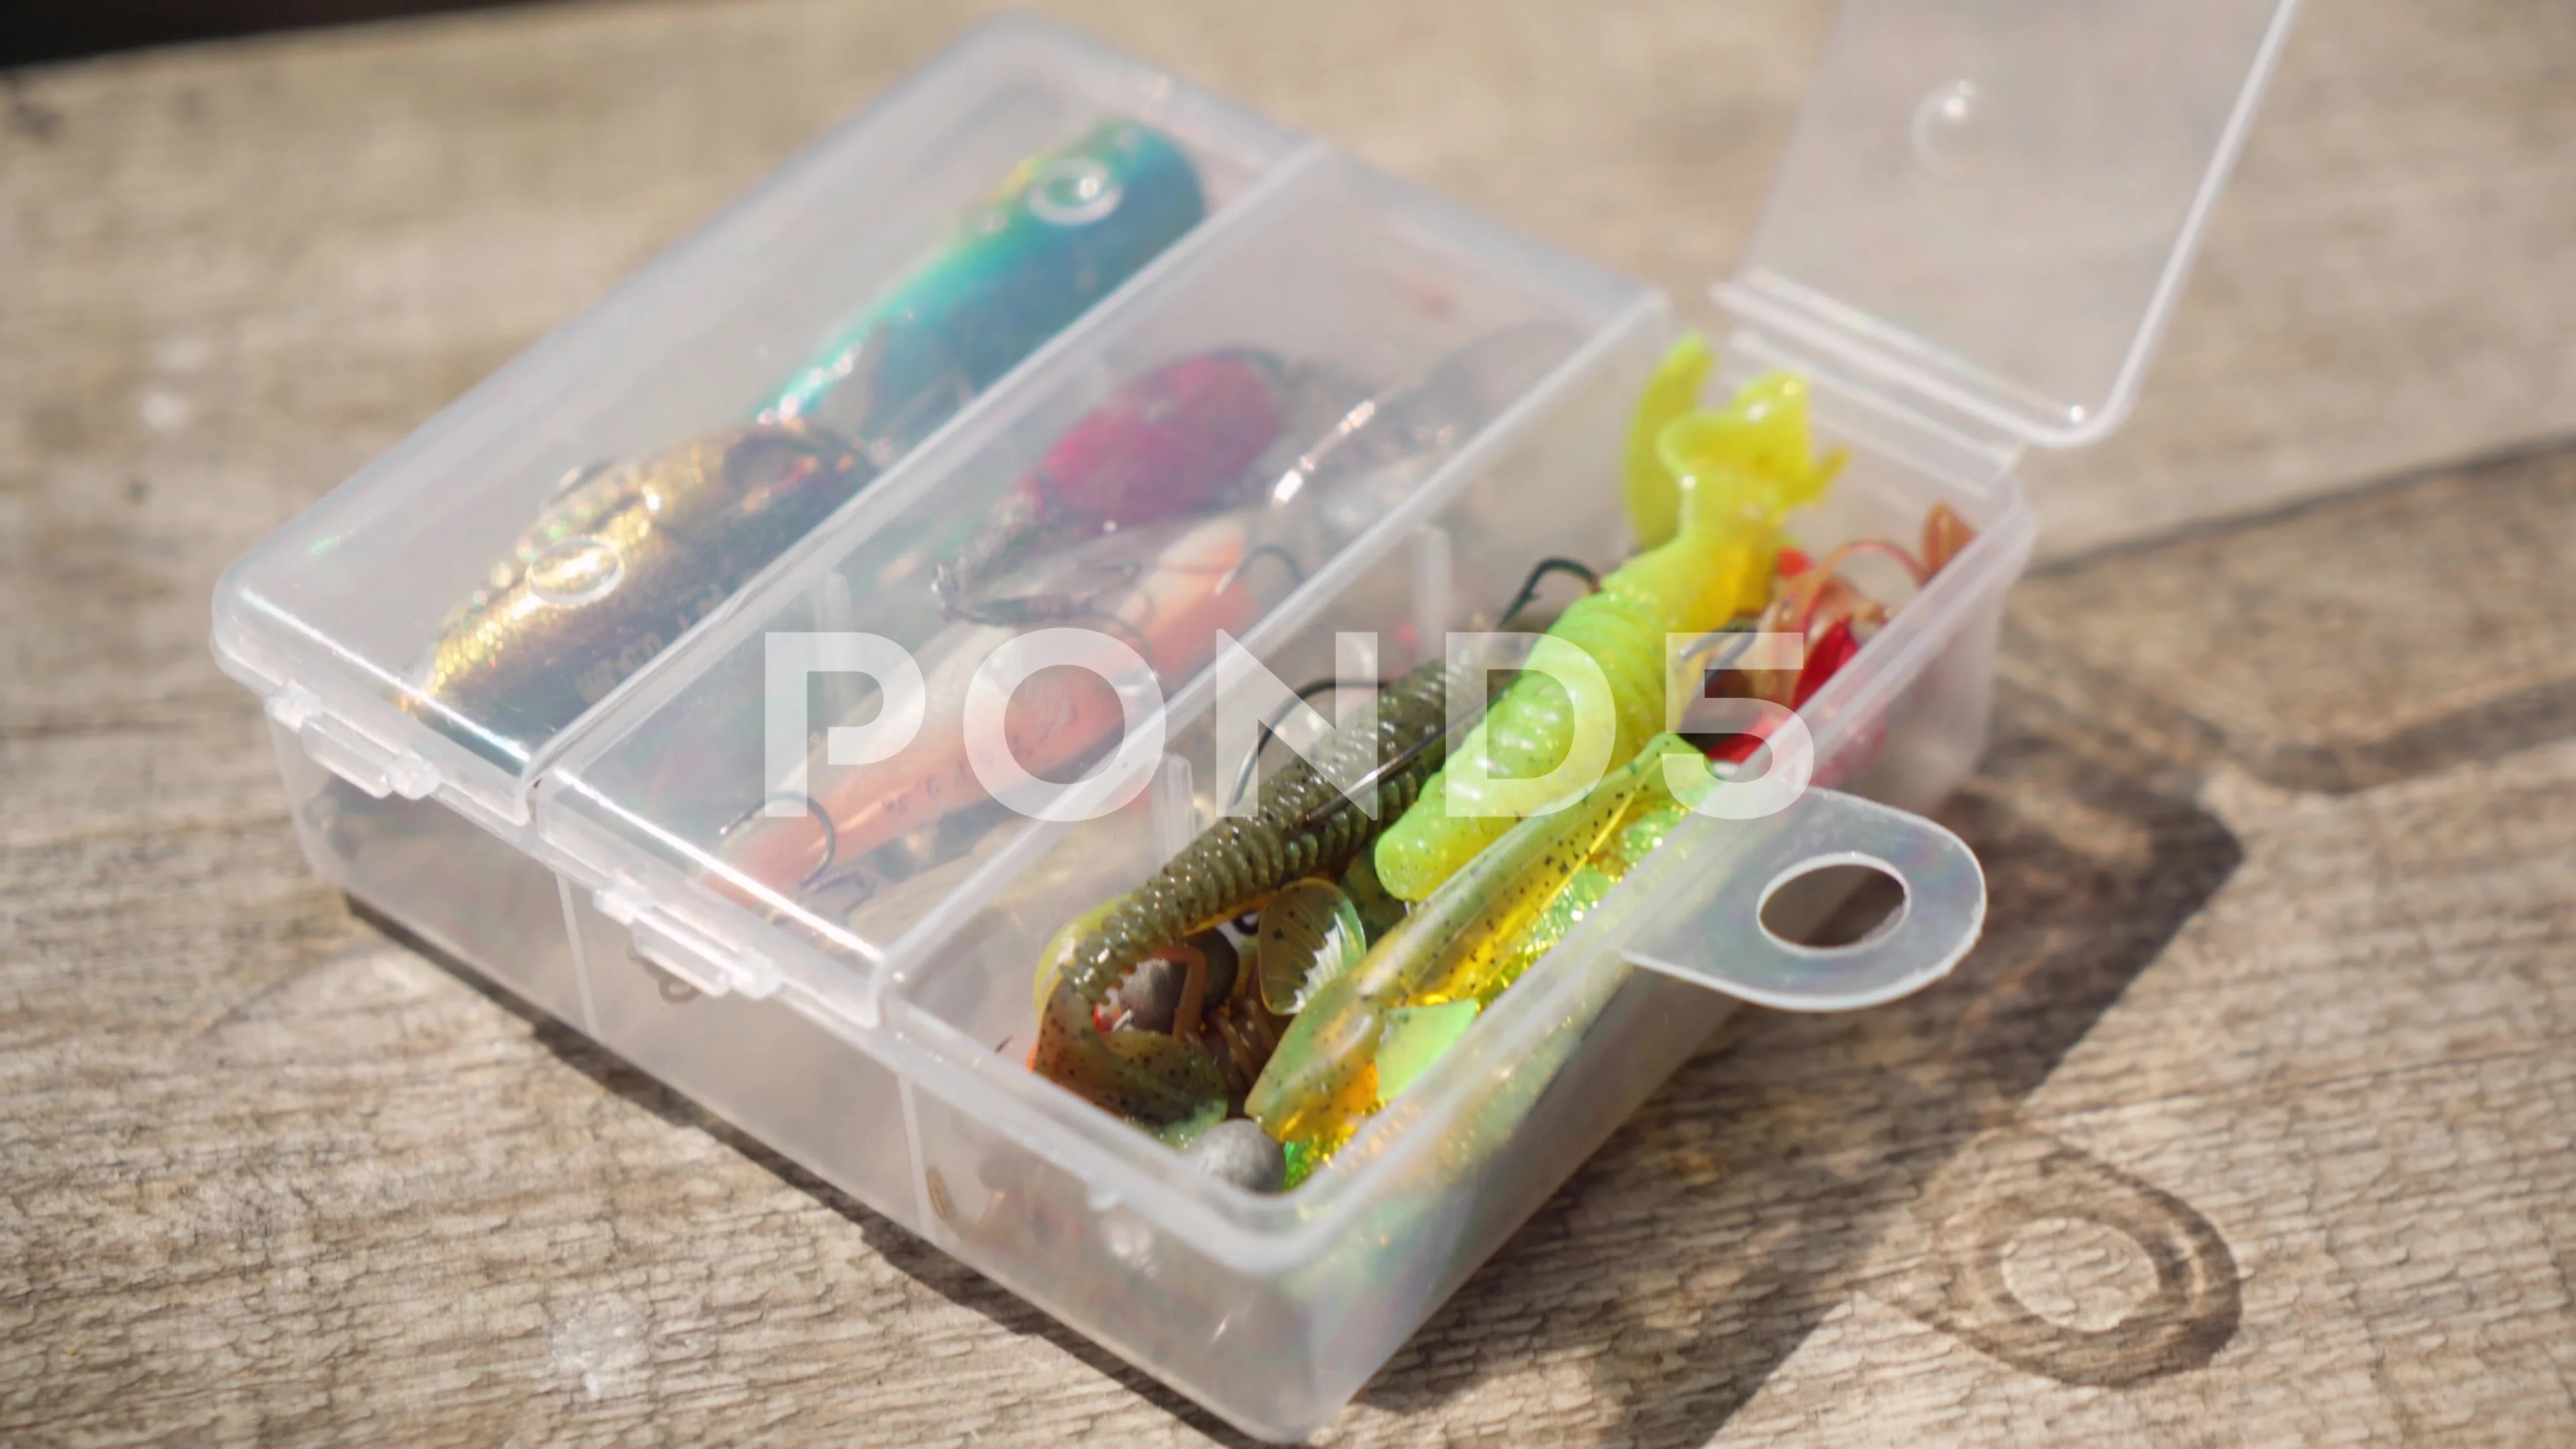 https://images.pond5.com/fishing-tackle-and-lures-box-footage-241178114_prevstill.jpeg